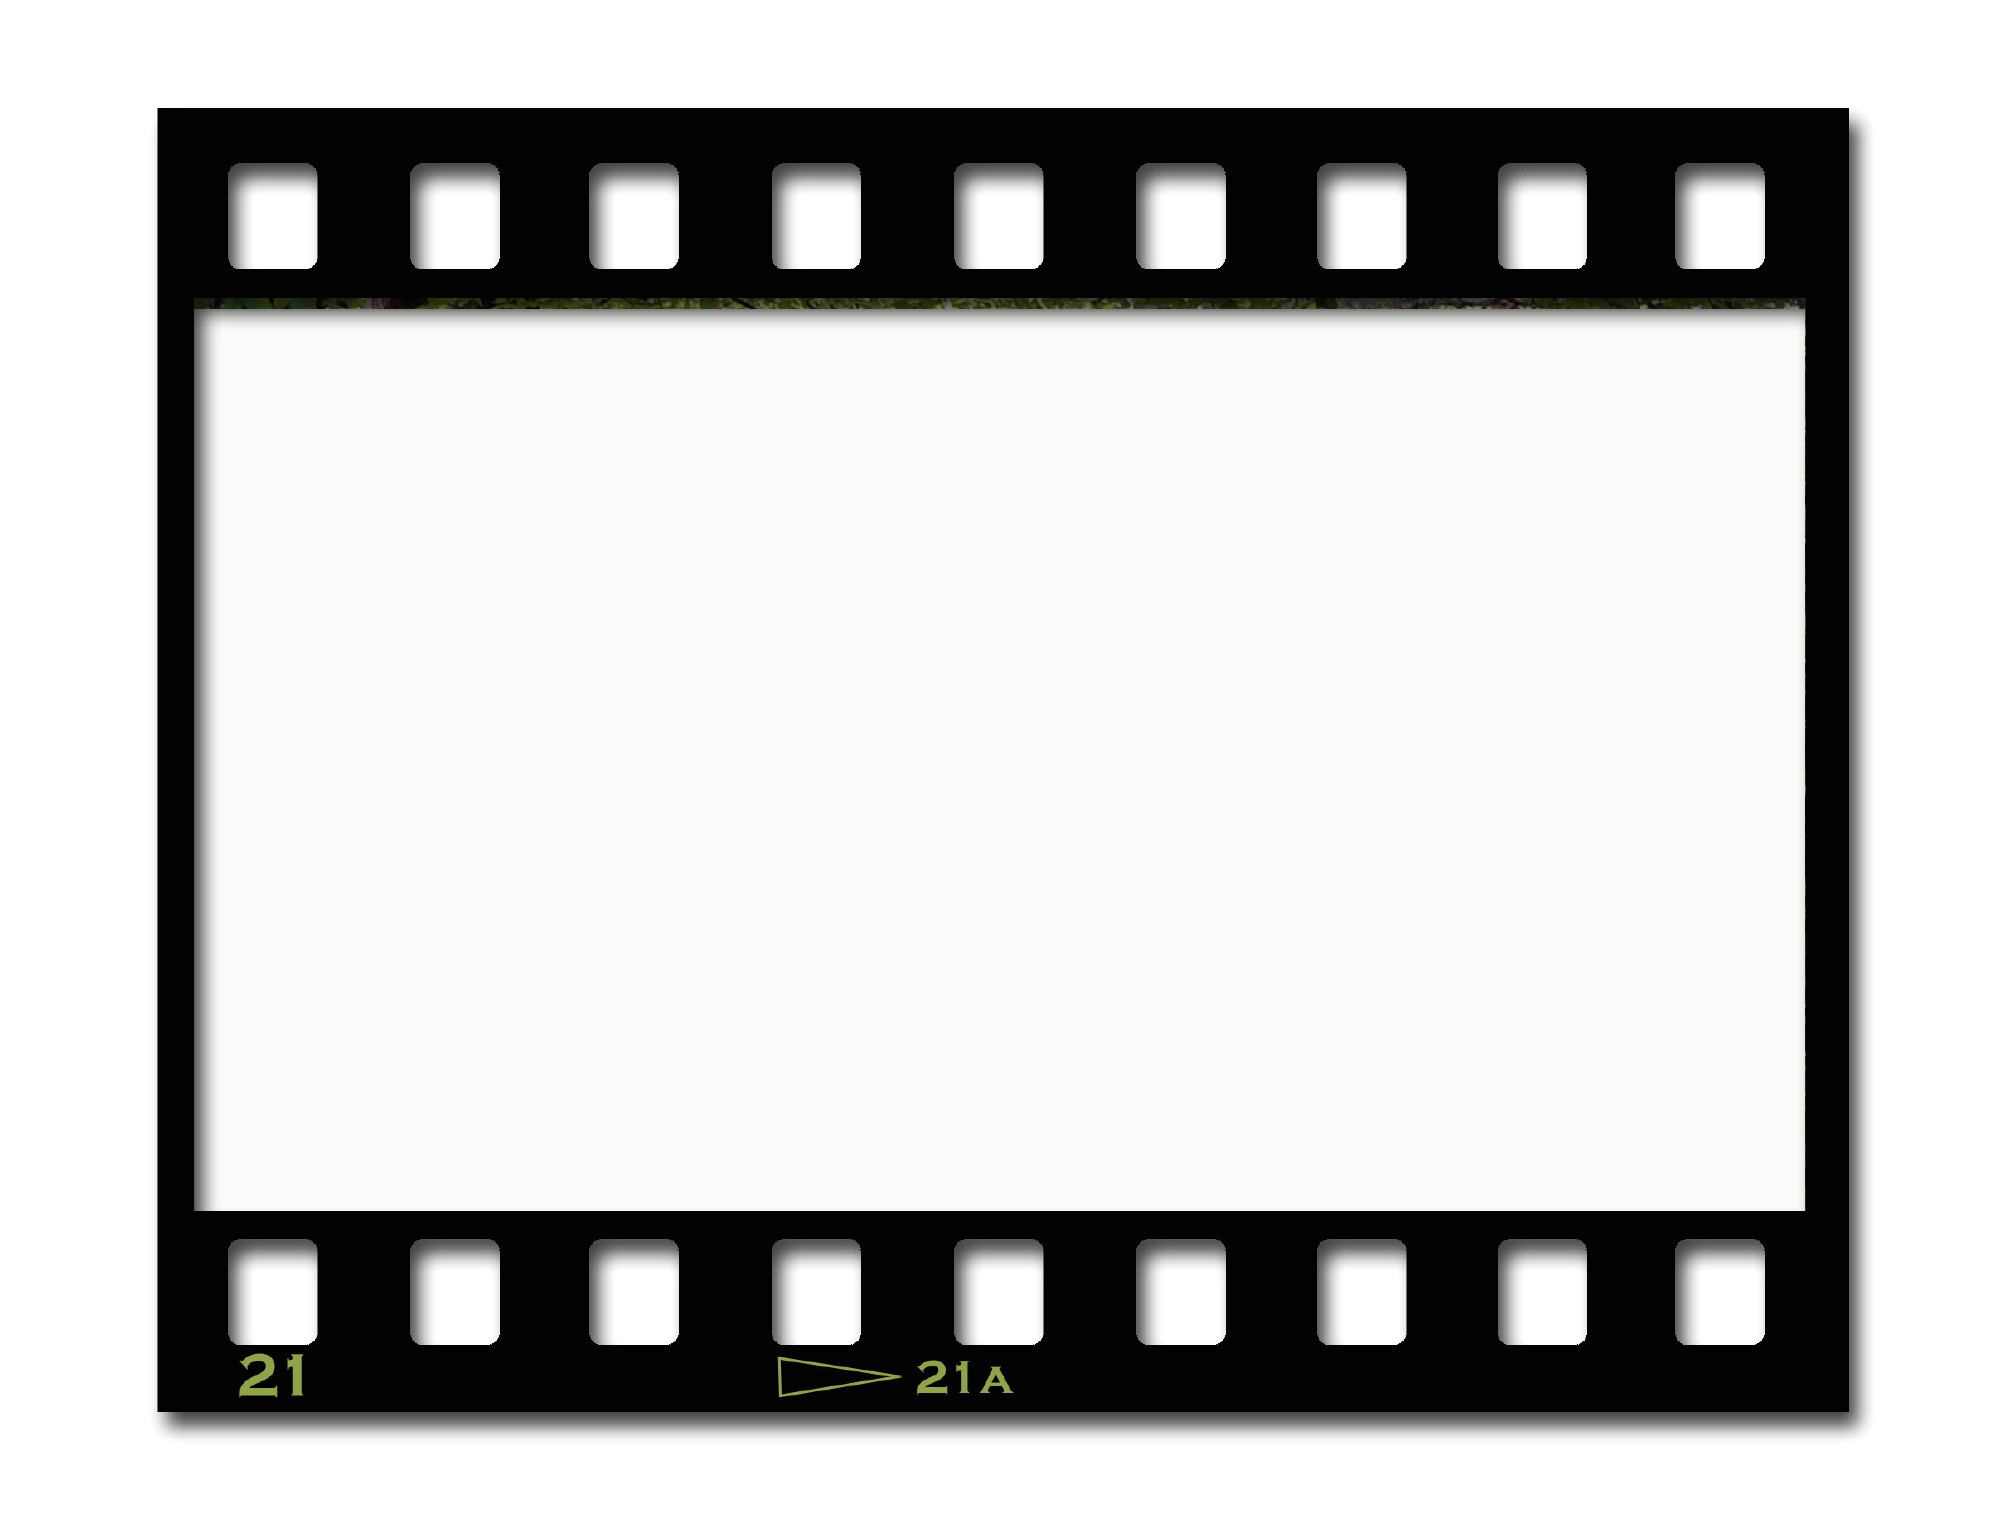 Film Strip Picture Template Film Strip Template for Free Clipart Best